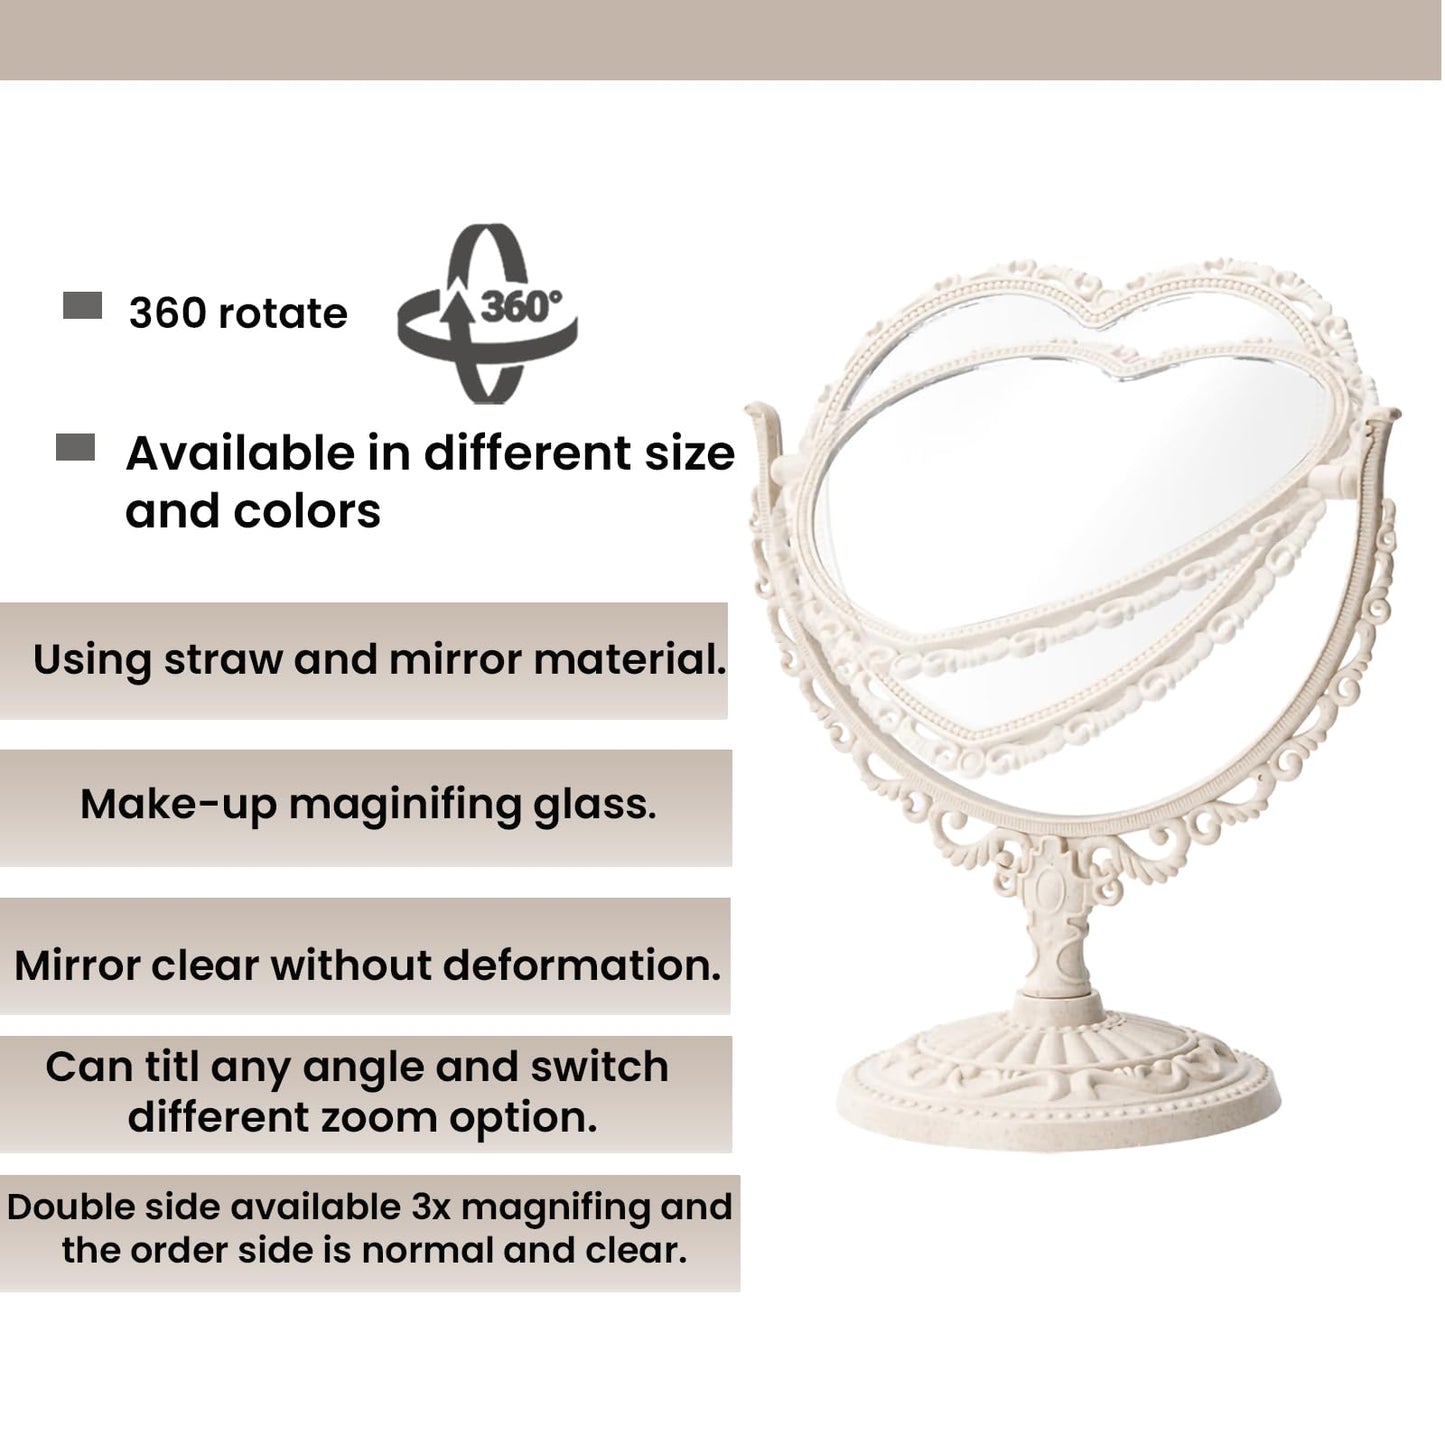 XPXKJ 7 Inch Vintage Heart Mirror - Elegant Desk Makeup Mirror with Double Sided 360 Degree Rotation Vanity Mirror for Coquette Room Decor (Beige 1pcs)